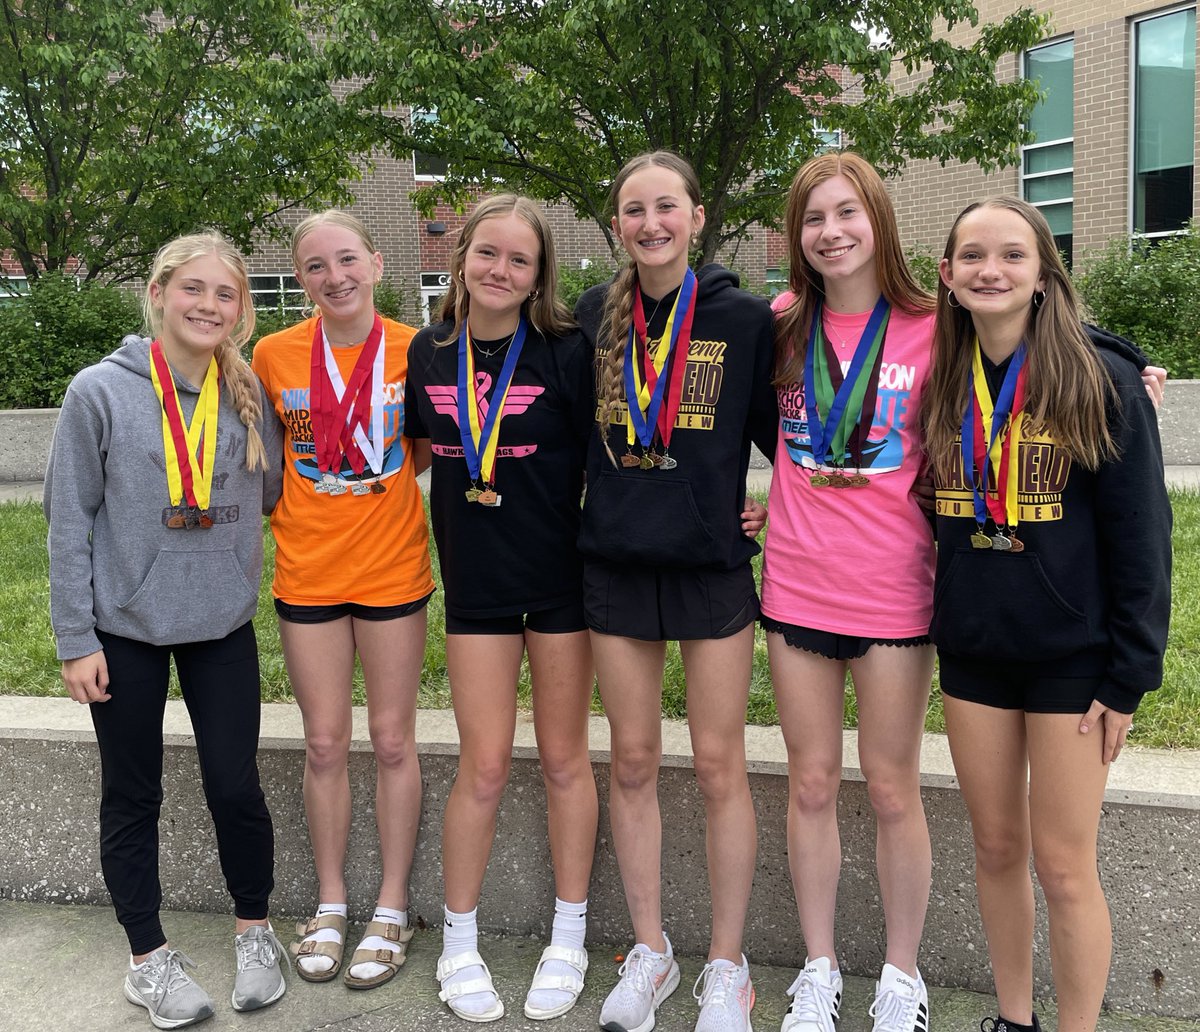 Special shout out to our state meet medal winners!! Abby Steinkamp Morgan Fisher Tenley Heidemann Brylee Bach Kiresten Petersen Lily Jones Congratulations and thanks to them for all of their hard work and leadership this year!! ⭐️👏🏼👏🏼